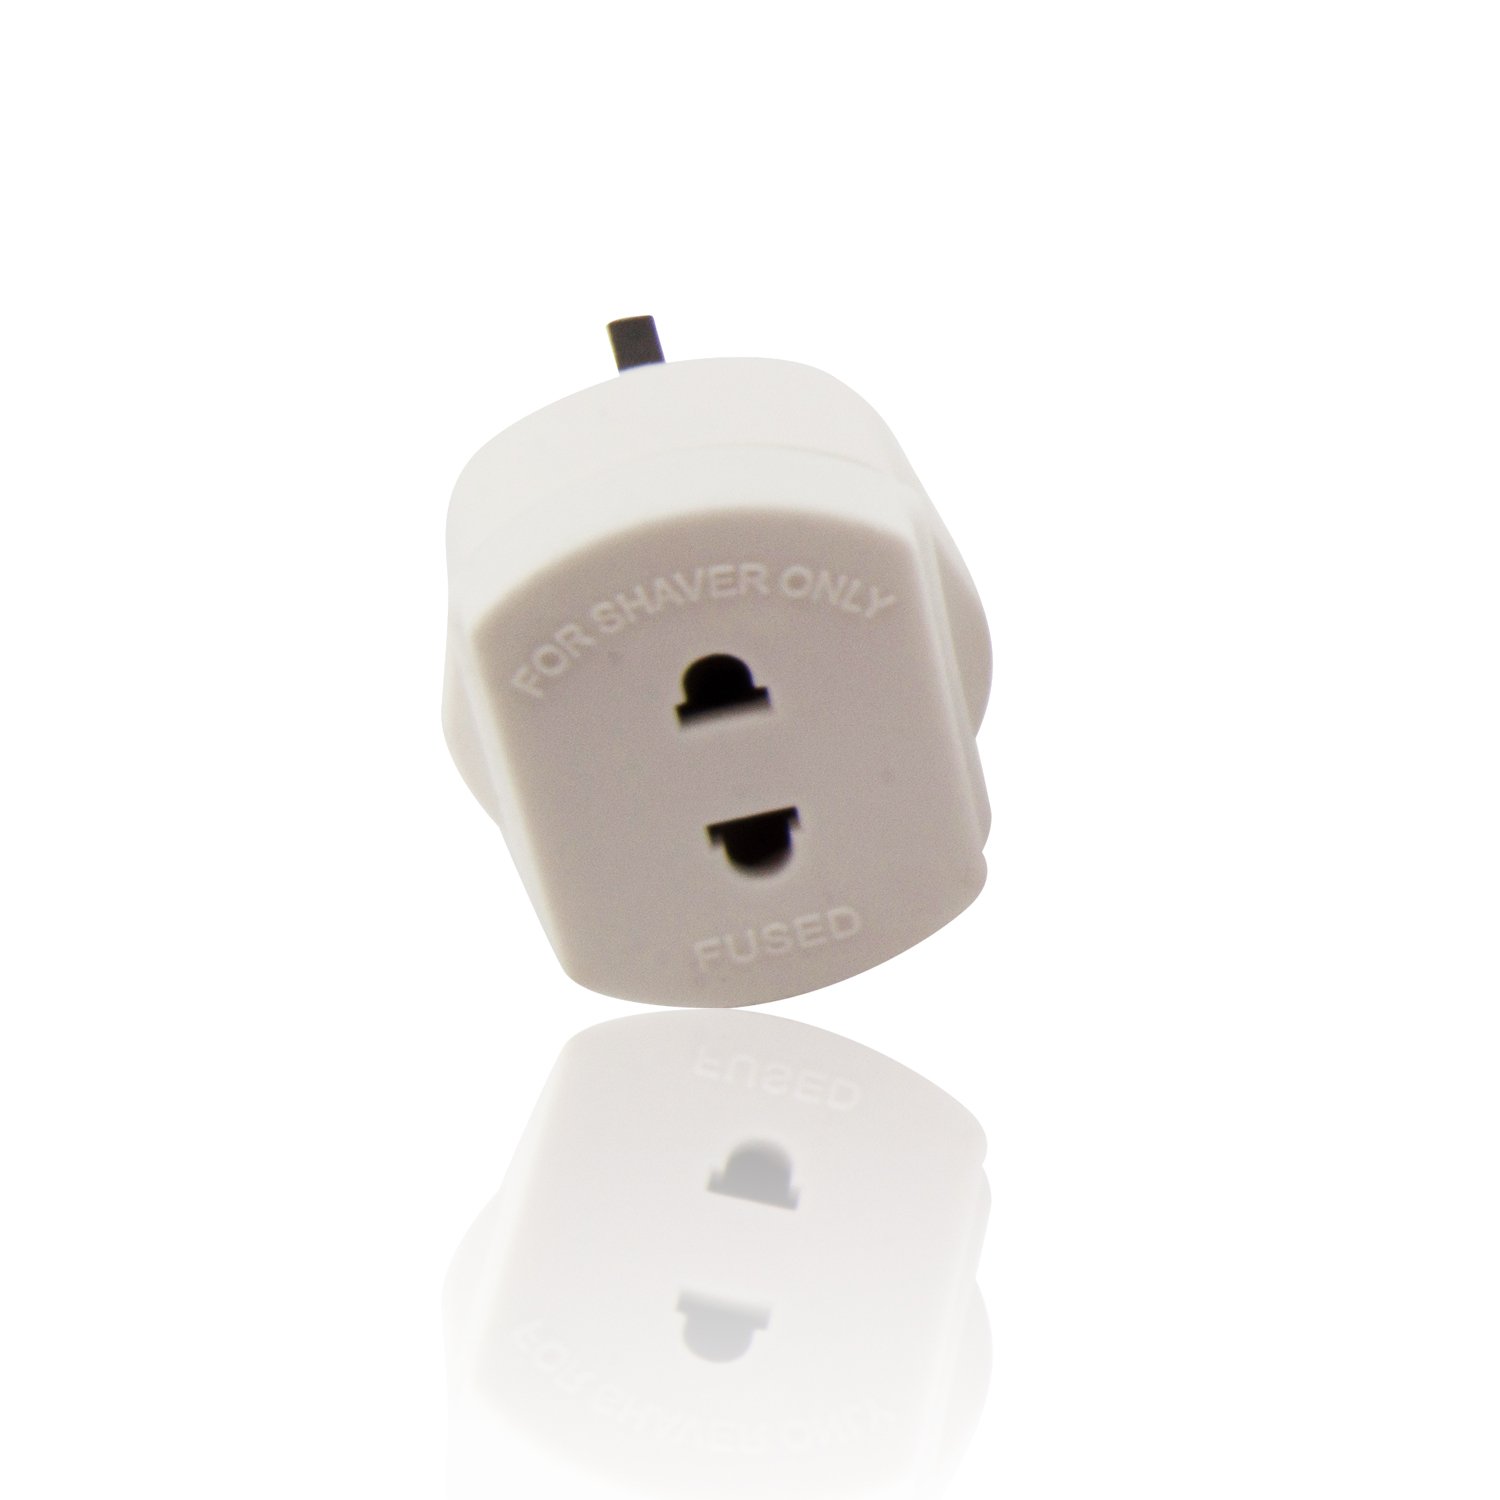 White CDL Micro 1 A 250 V 2 Pin Electric Toothbrush Plug to 3 Pin UK Mains Adapter Fused